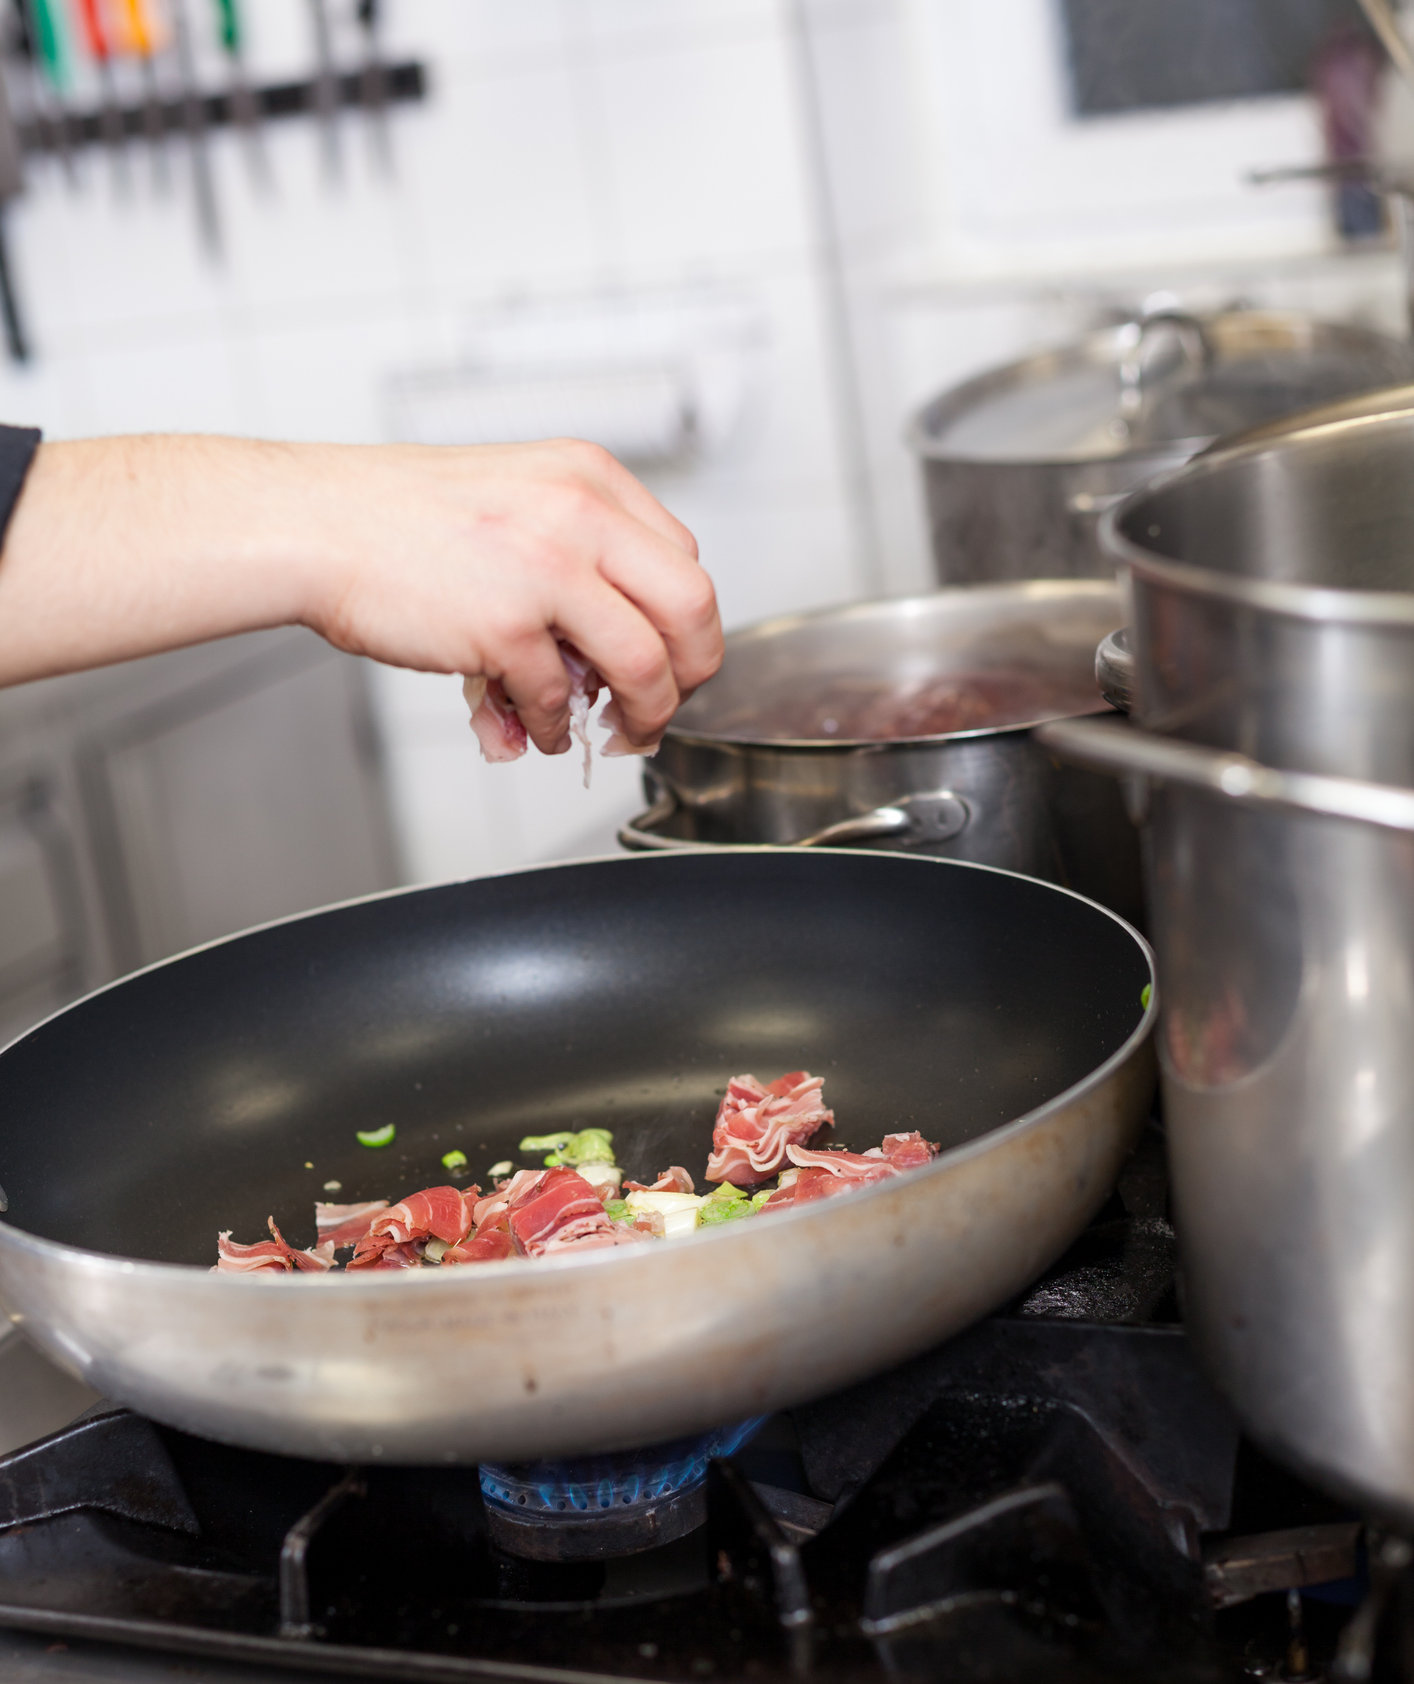 Will Cooking Your Meals in Non-Stick Pans Make You Fat?